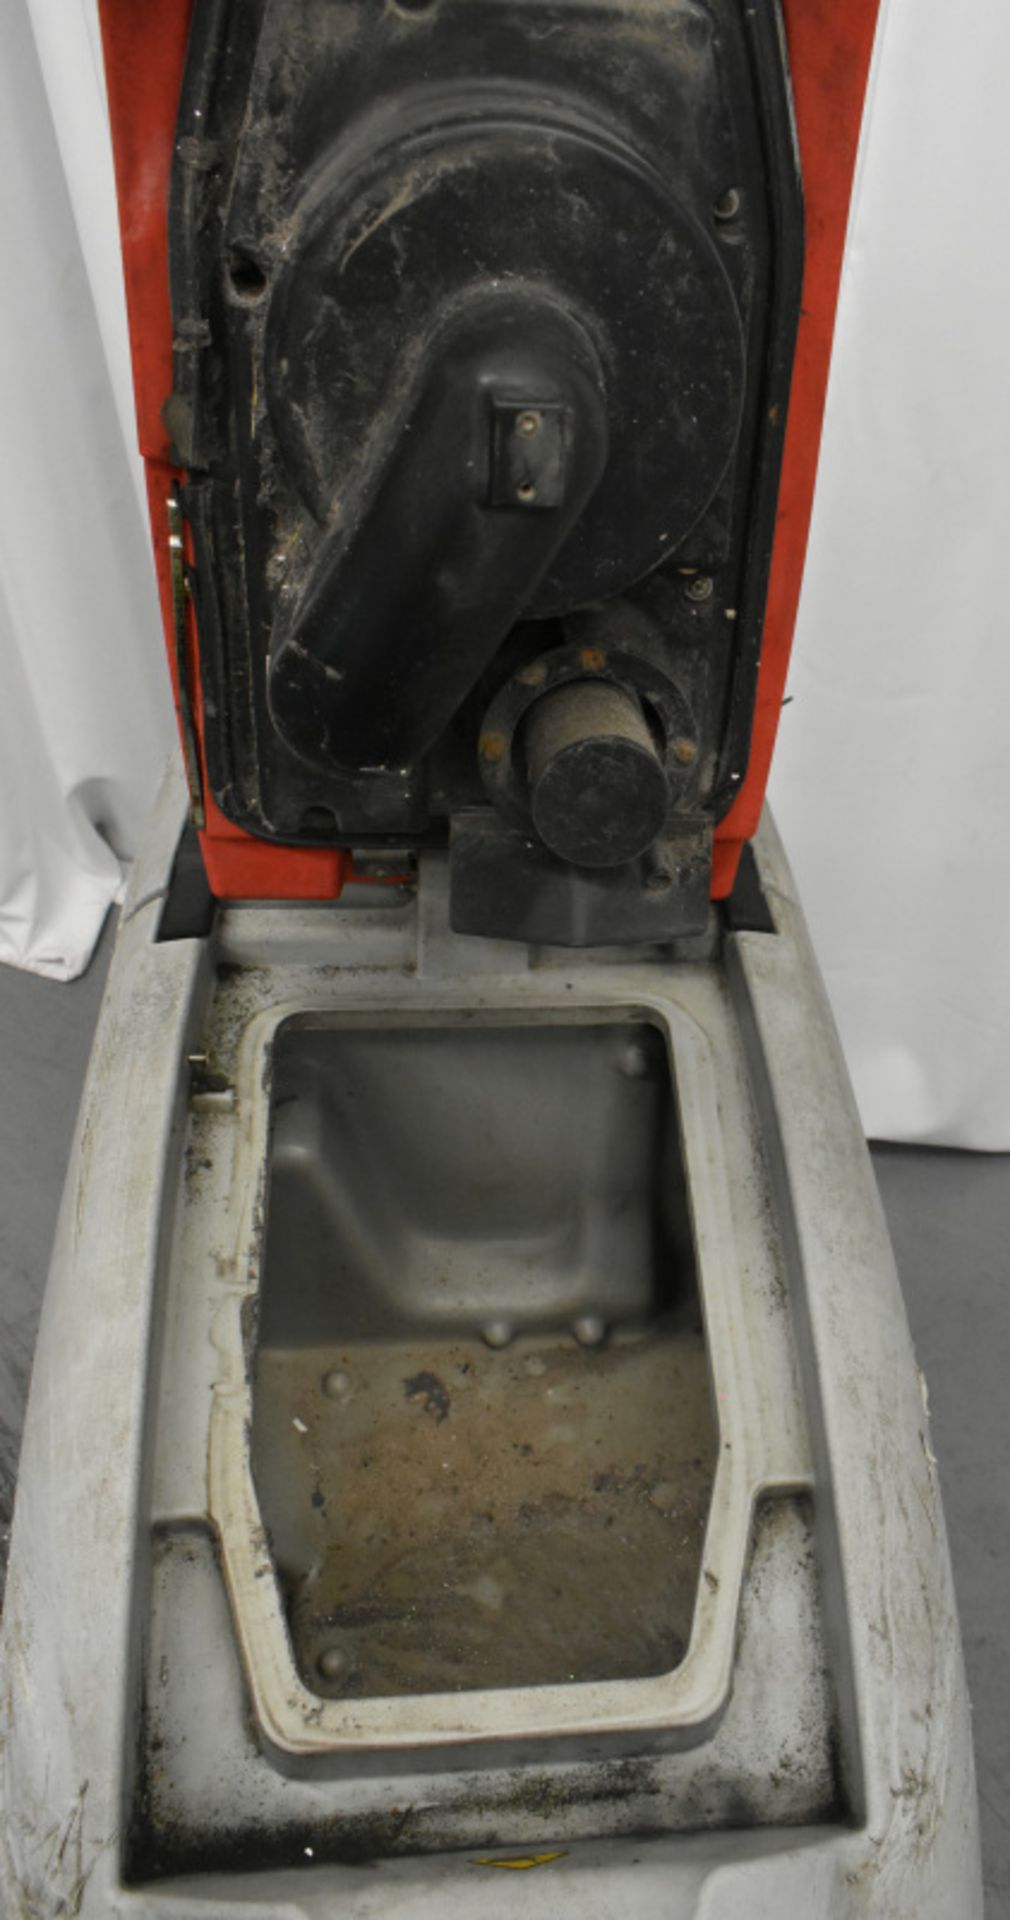 Comac Abila 52Bt Floor Scrubber Dryer, comes with key, starts and runs- 841 hours - Image 5 of 7